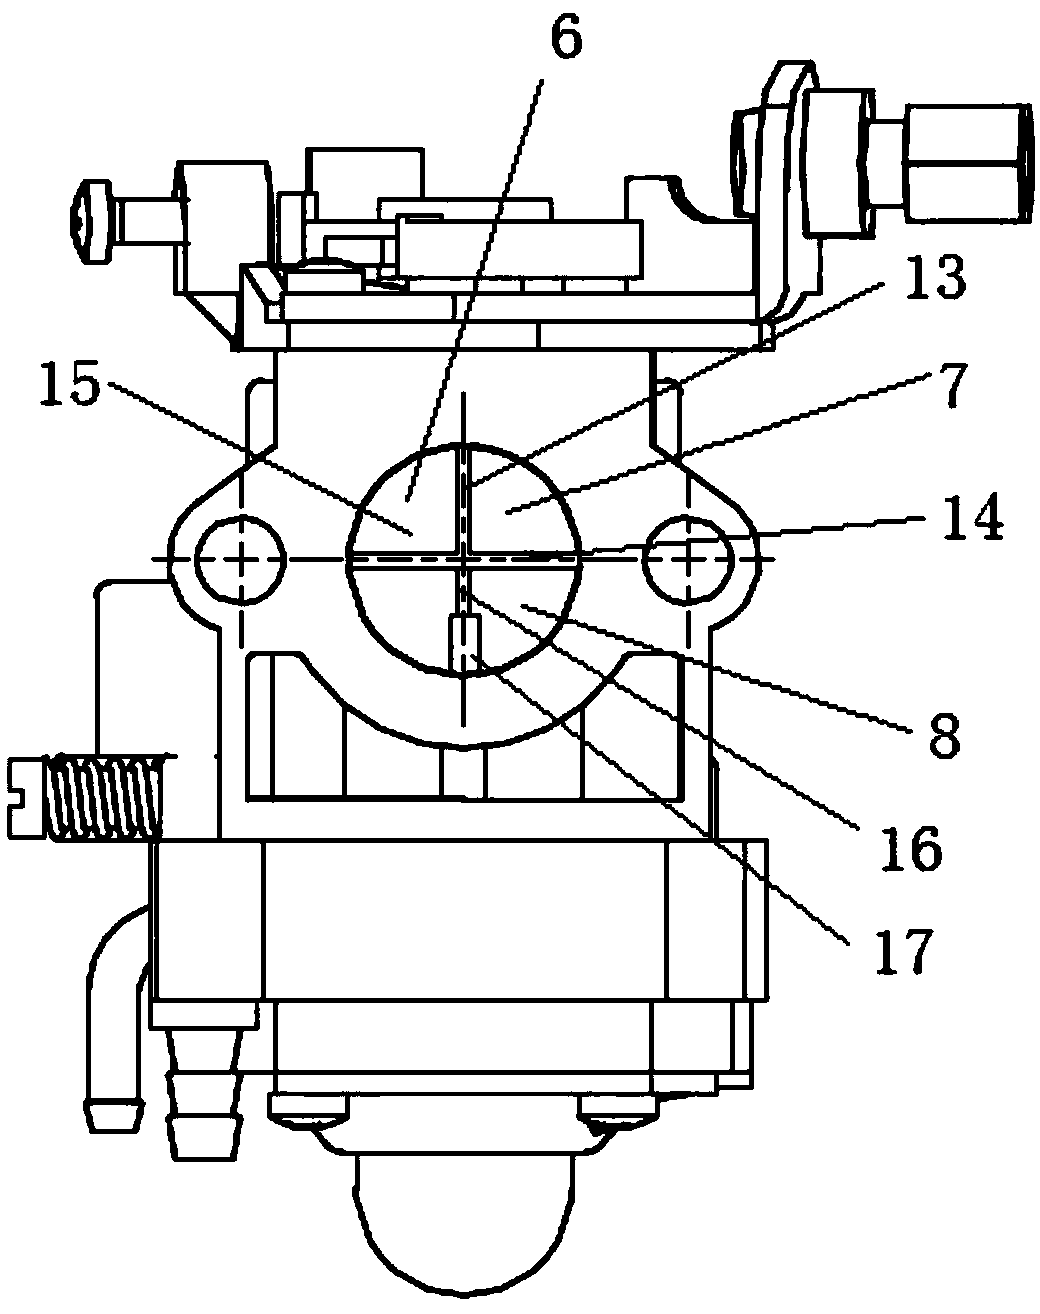 Two-stroke air-guided engine air inlet system